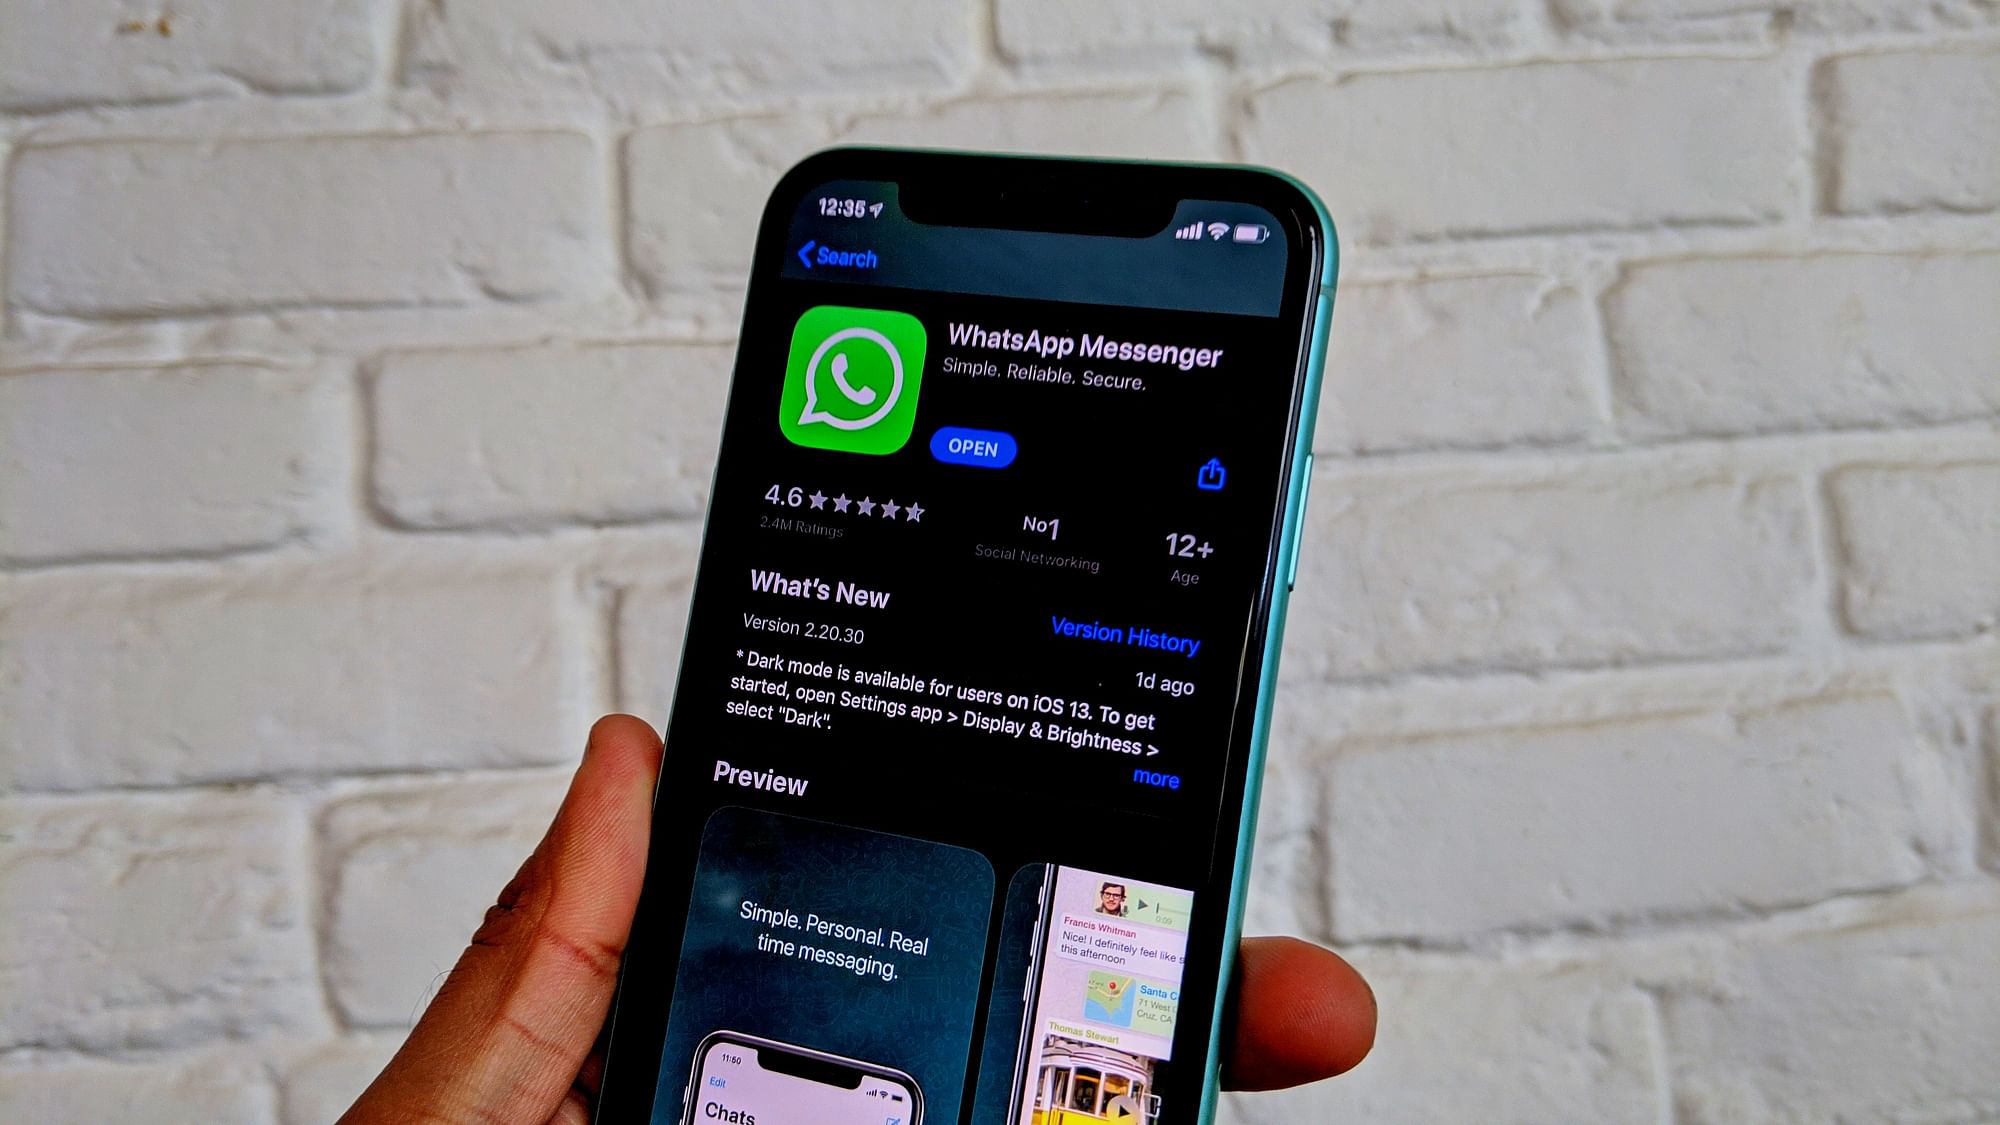 Dark mode is finally coming to WhatsApp for both Android and iOS users.